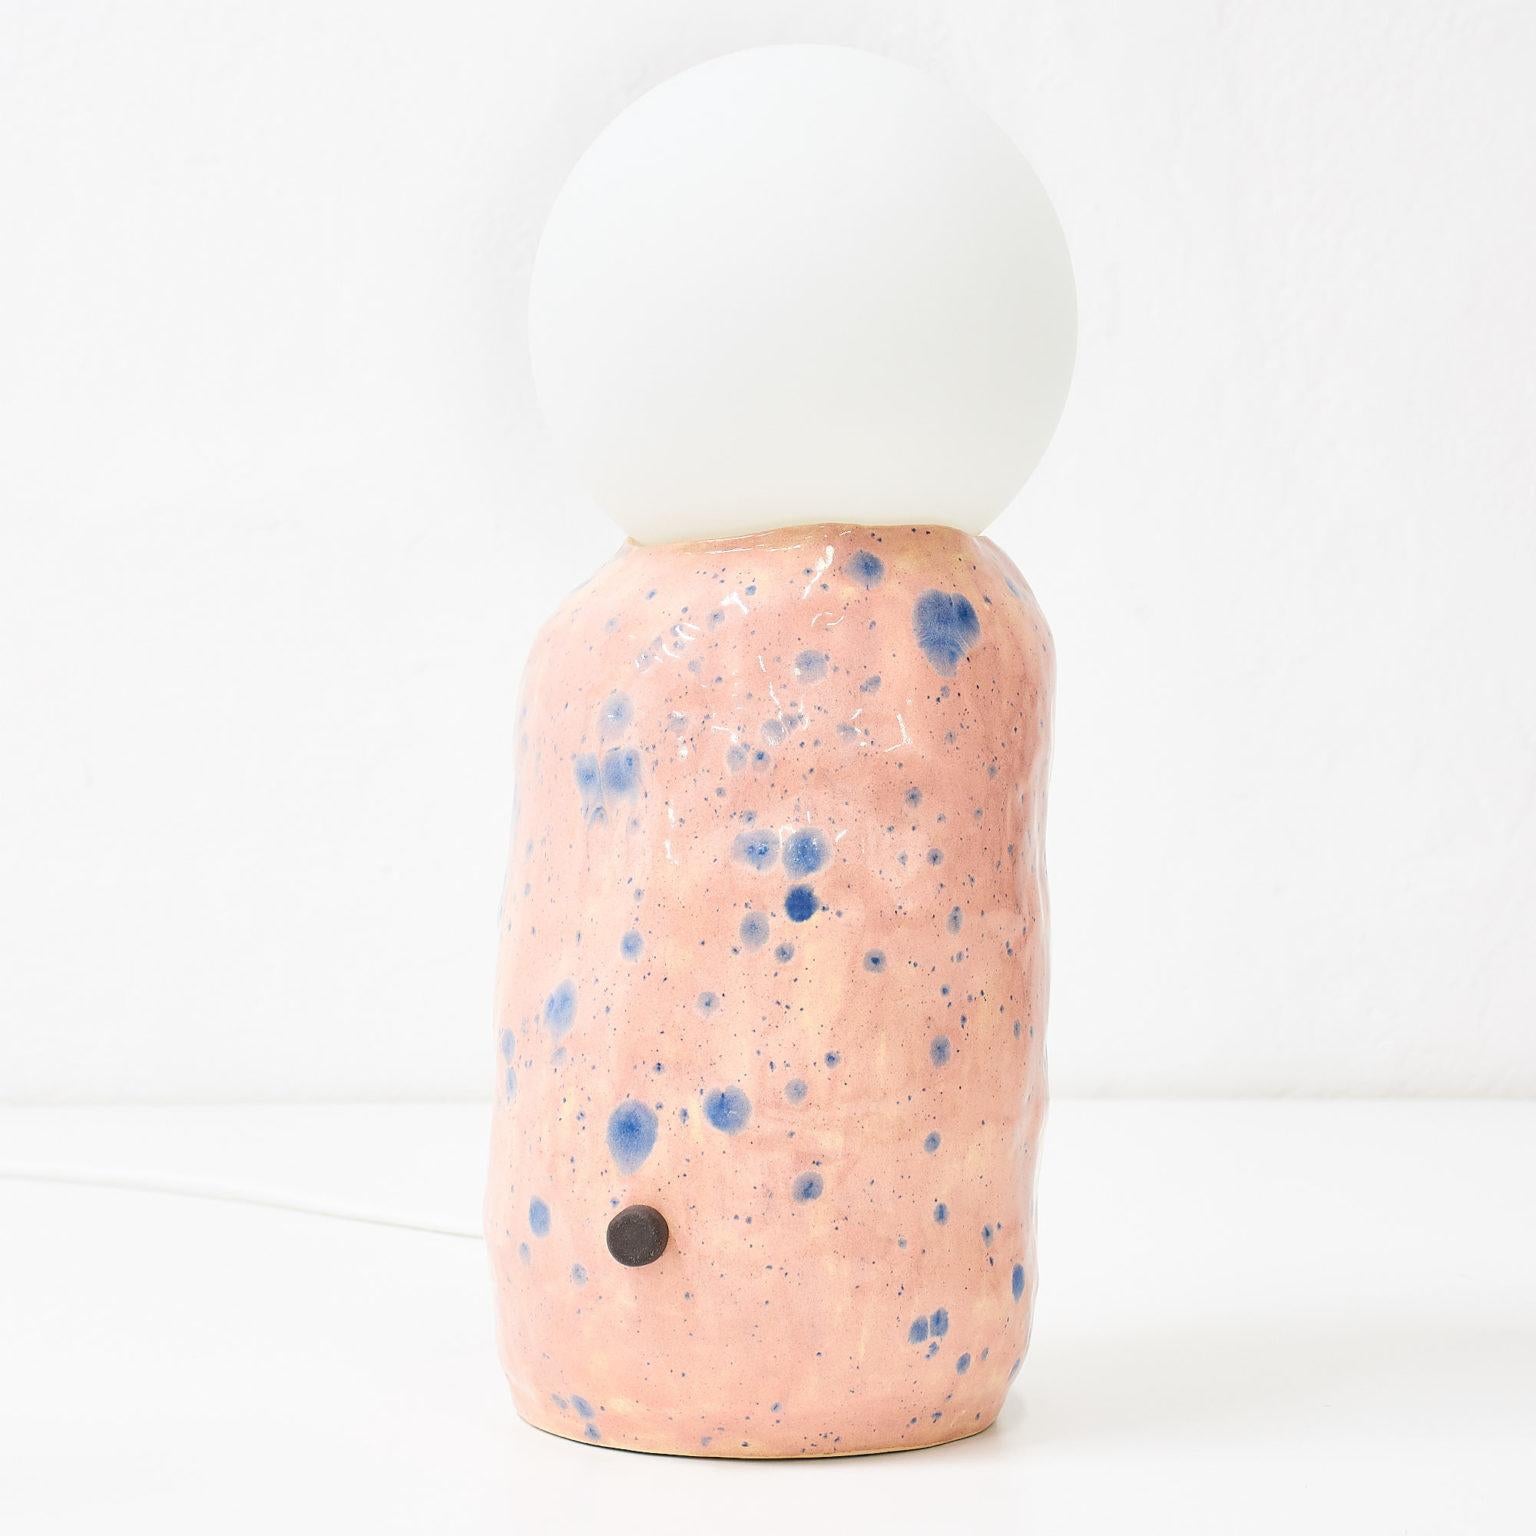 Big Spotty Lamp by Siup Studio.
Dimensions: ?20 x H 40 cm
Materials: glass and ceramics.
One of a kind.
All our lamps can be wired according to each country. Please contact us.

Hand made, ceramic lamp with on/off switch, 40W tungsten dimmable